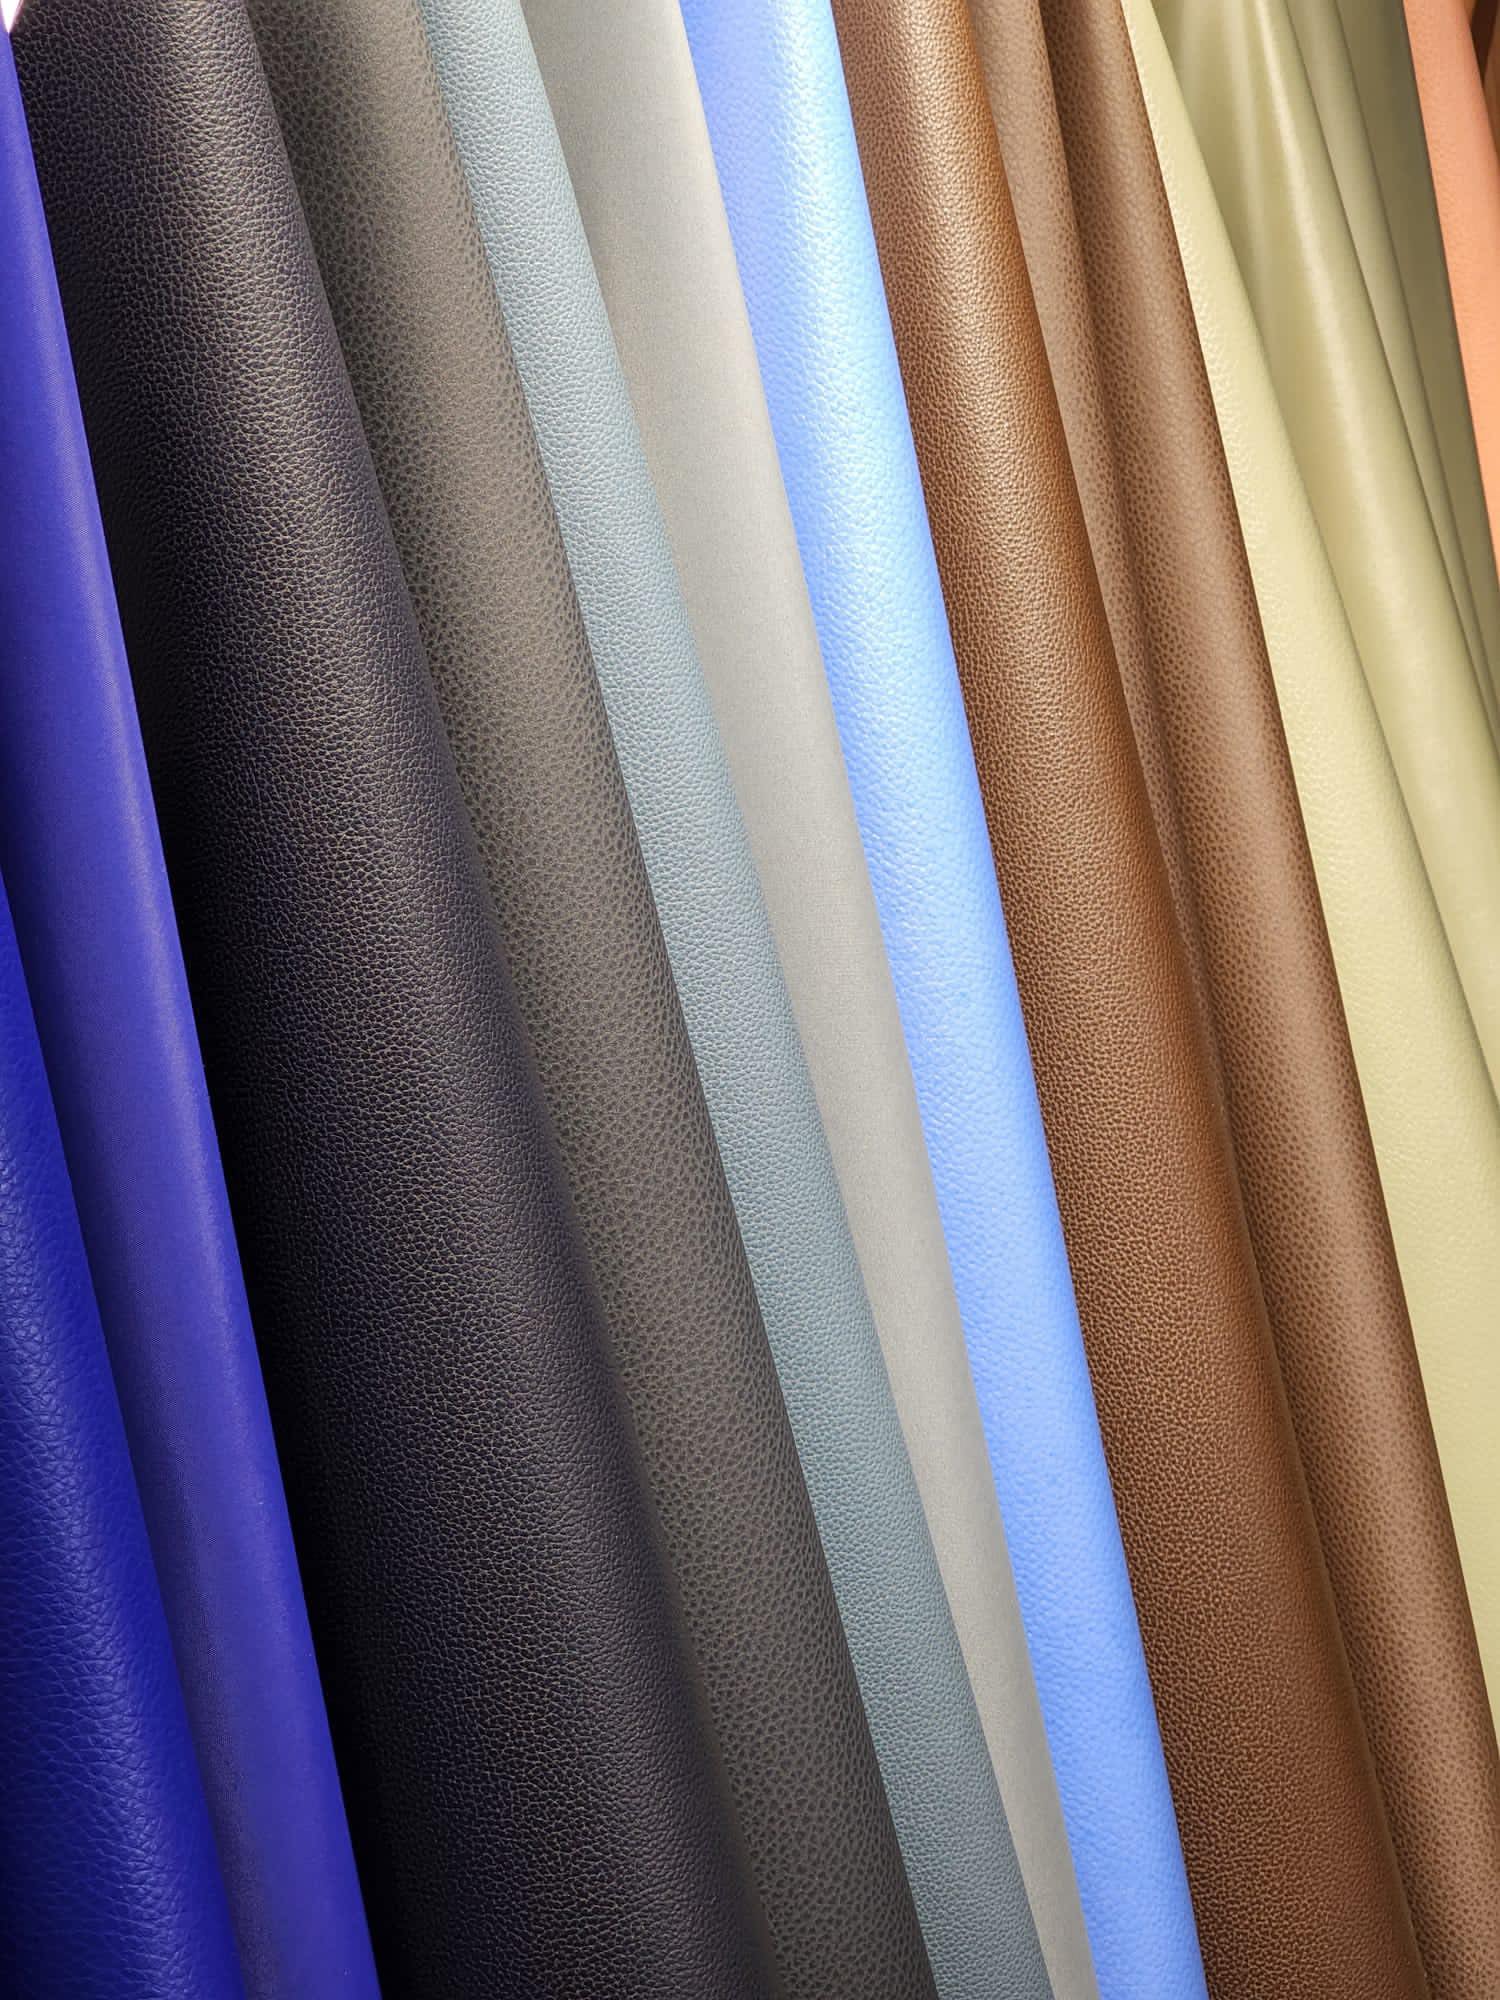 Designer Faux Leather Sheet Vinyl Synthetic Leather Fabric 